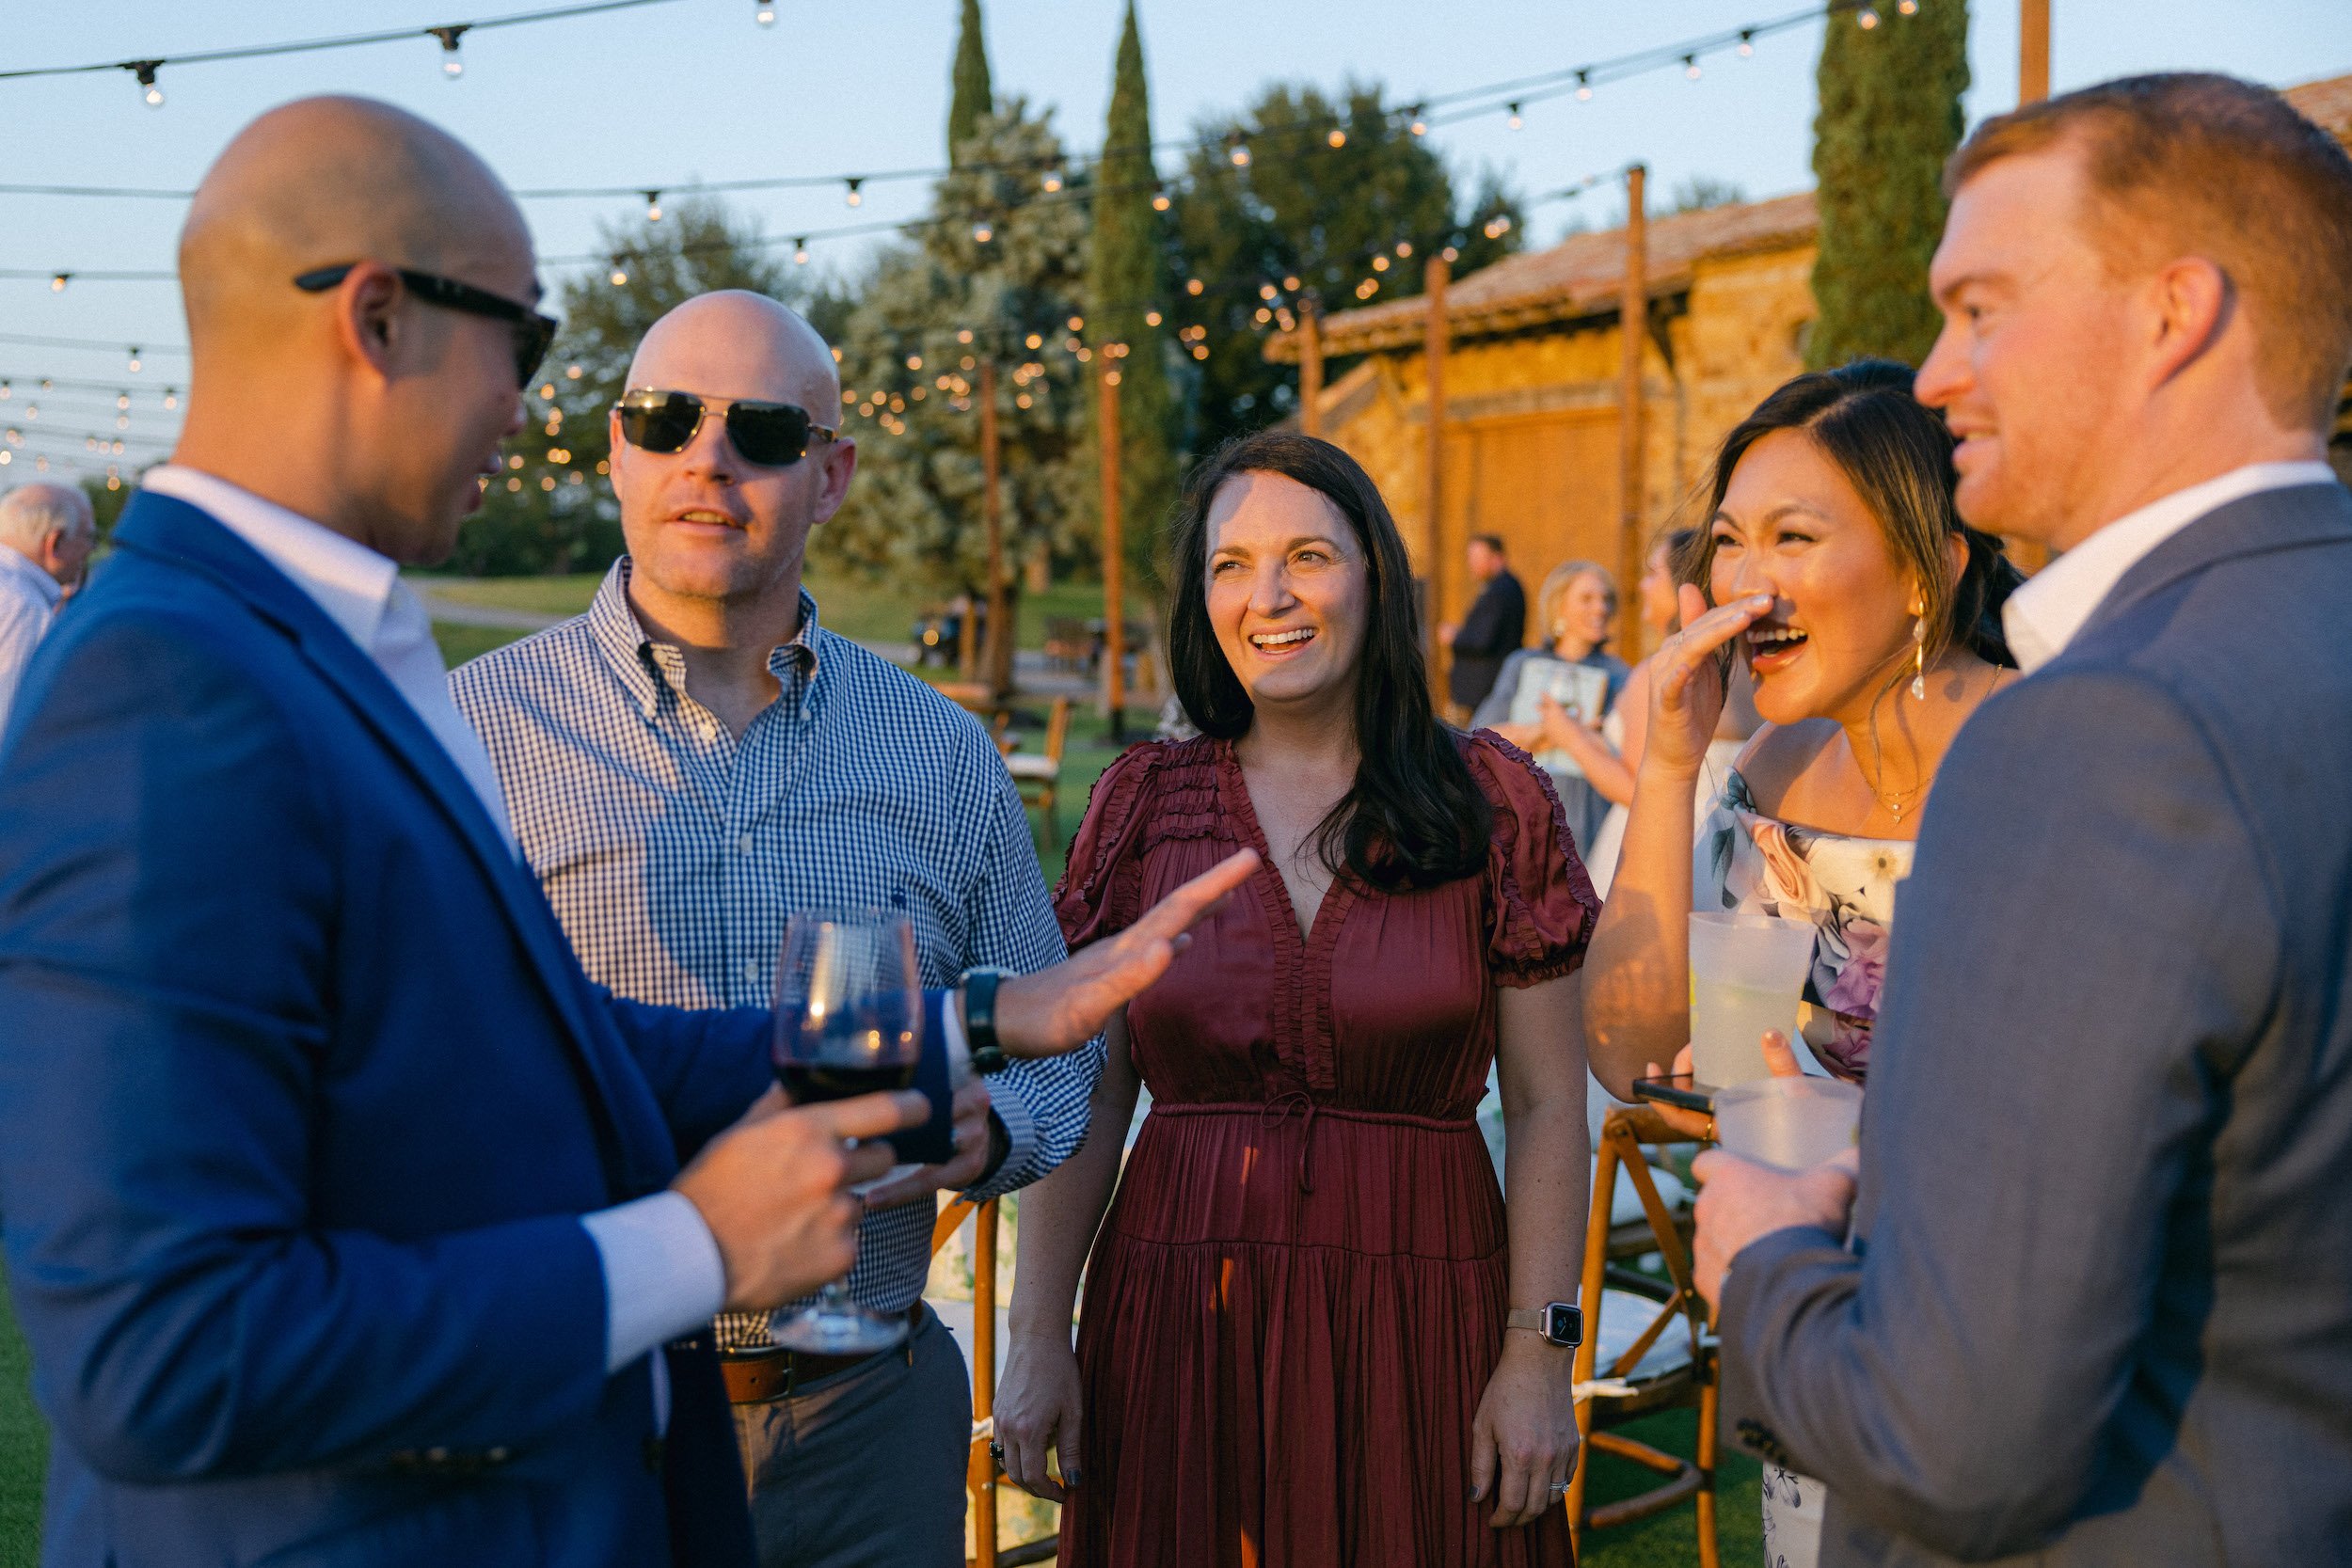 Guests Enjoy Cocktails Outdoors at Texas Rehearsal Dinner